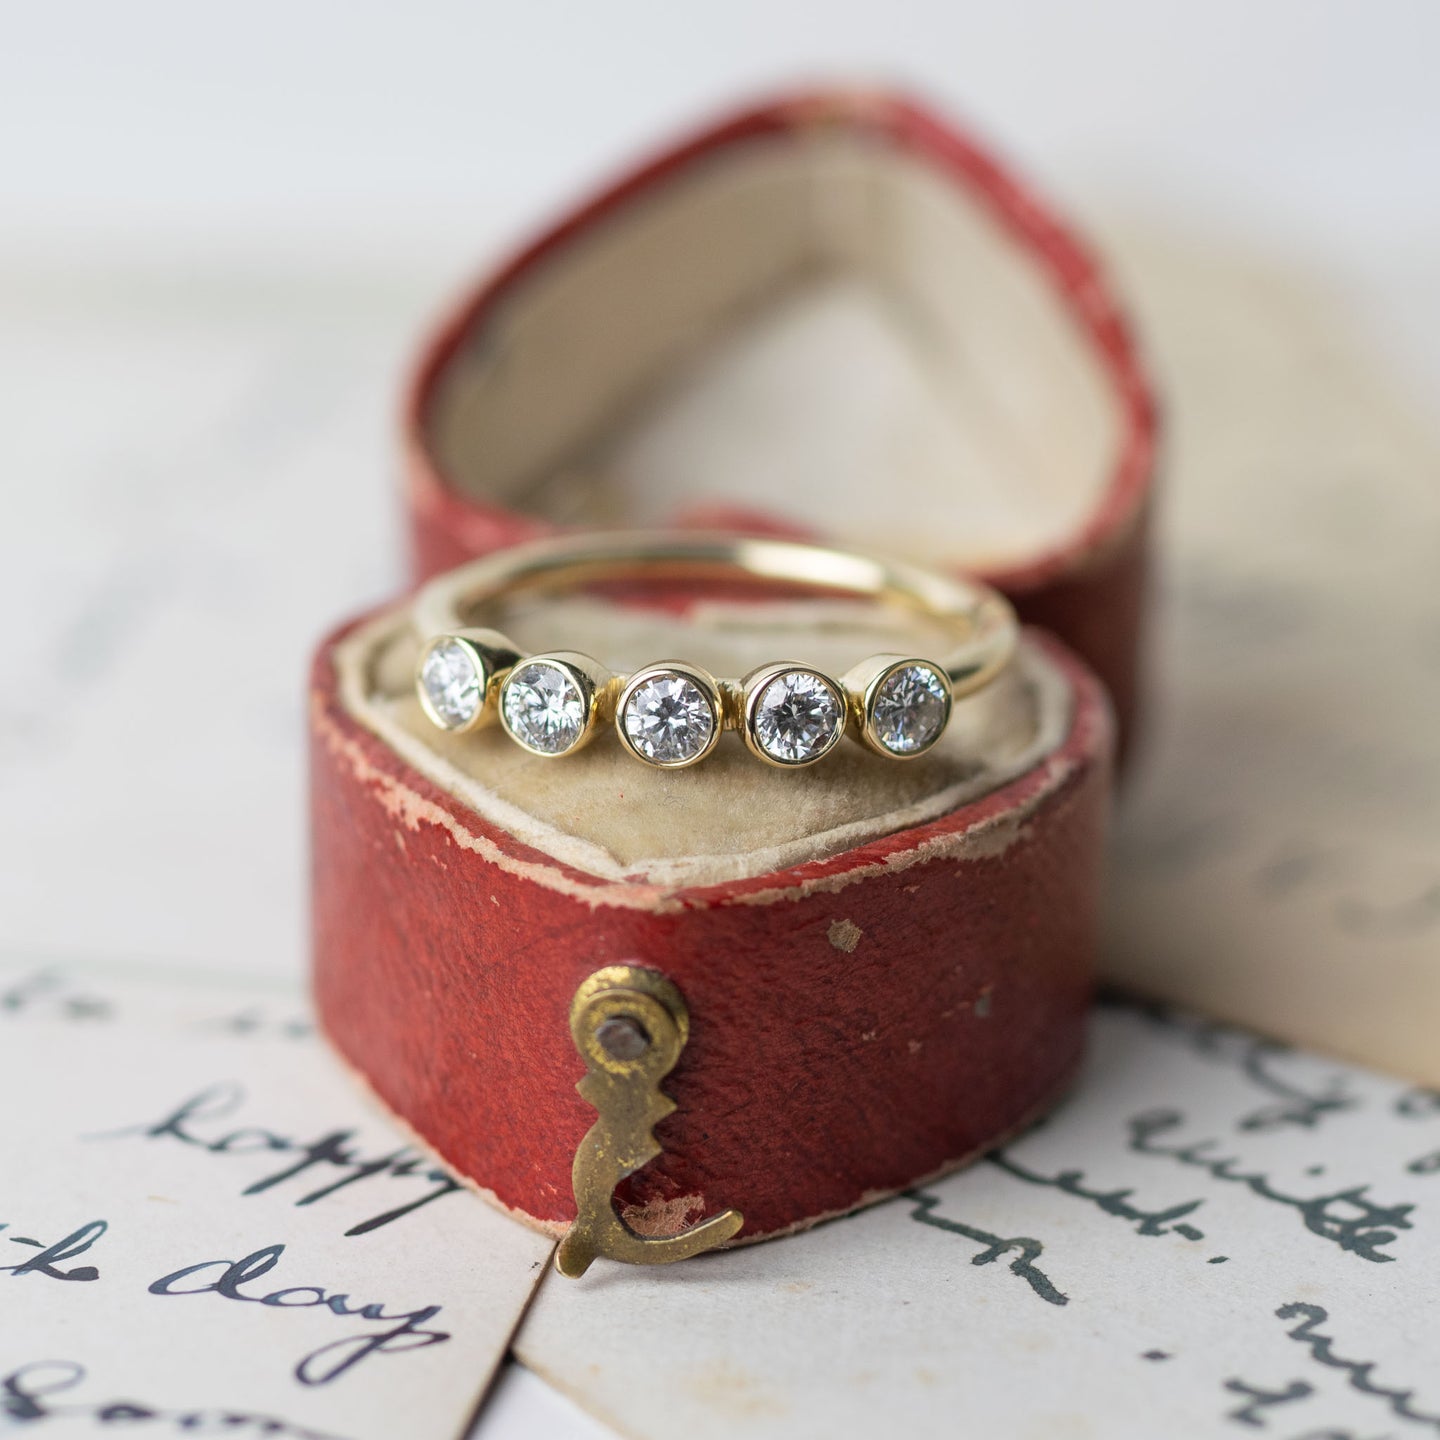 Diamond eternity ring in vintage red heart box